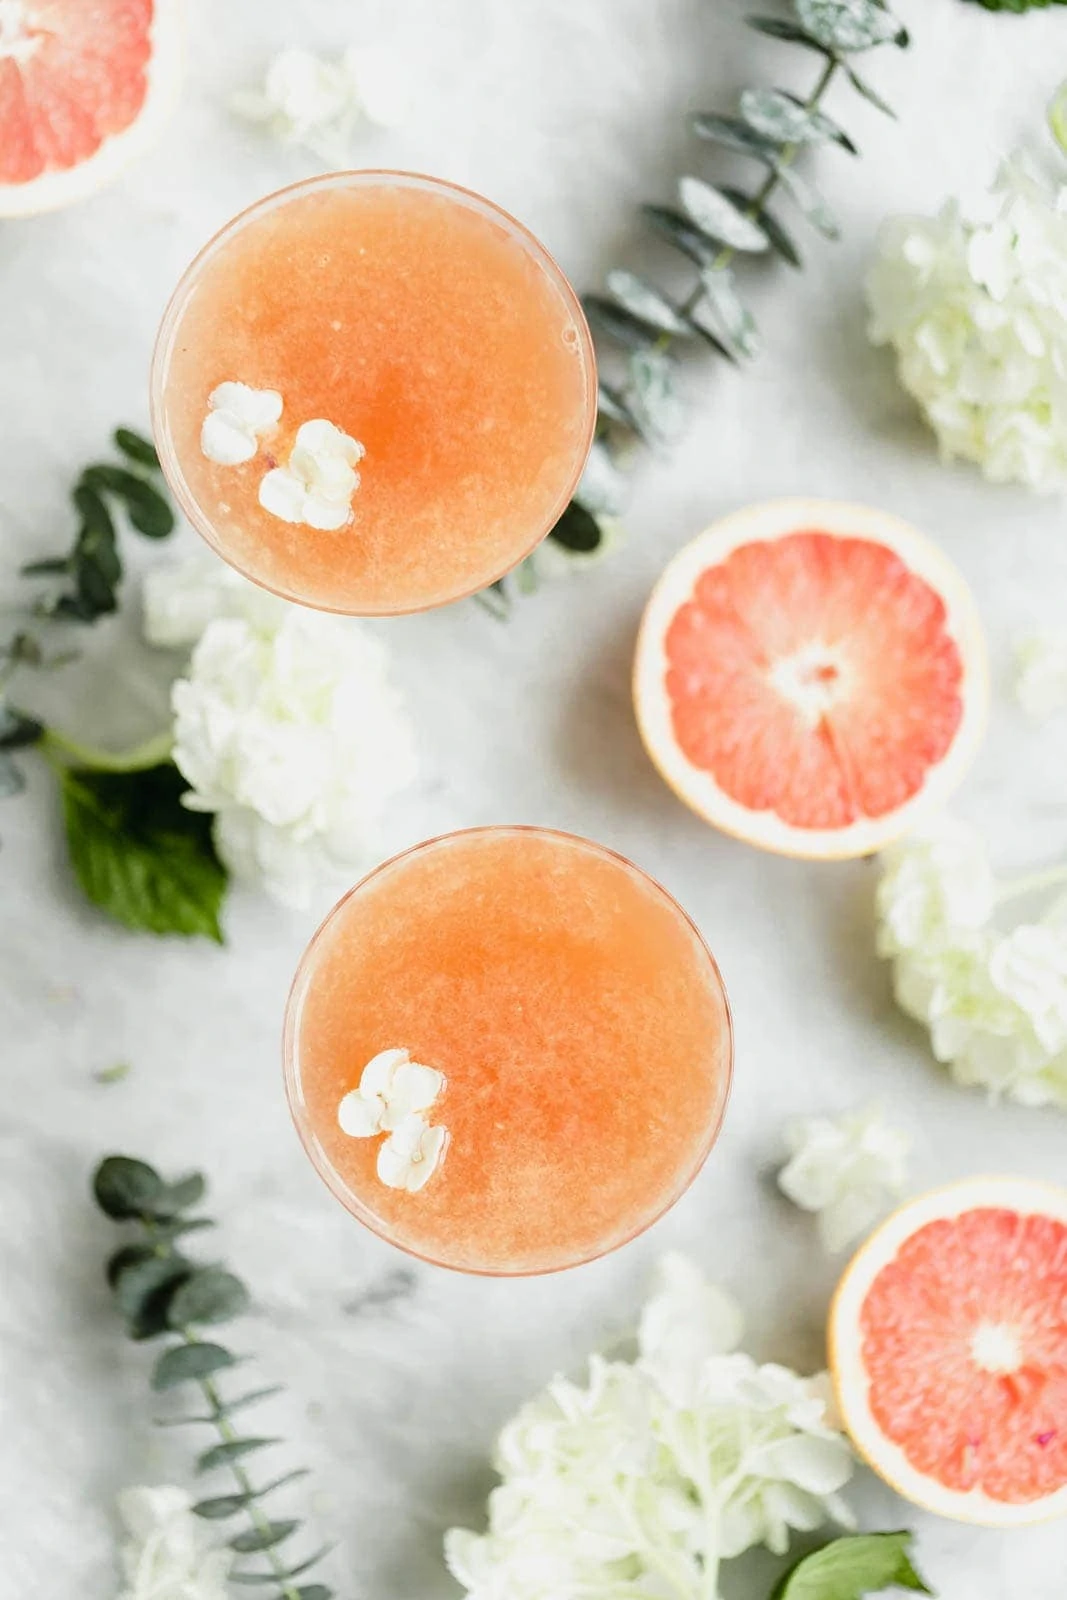 This 3-ingredient Paloma Fizz is made from sparkling grapefuit soda, lime, and silver tequila, and is best enjoyed with friends :)